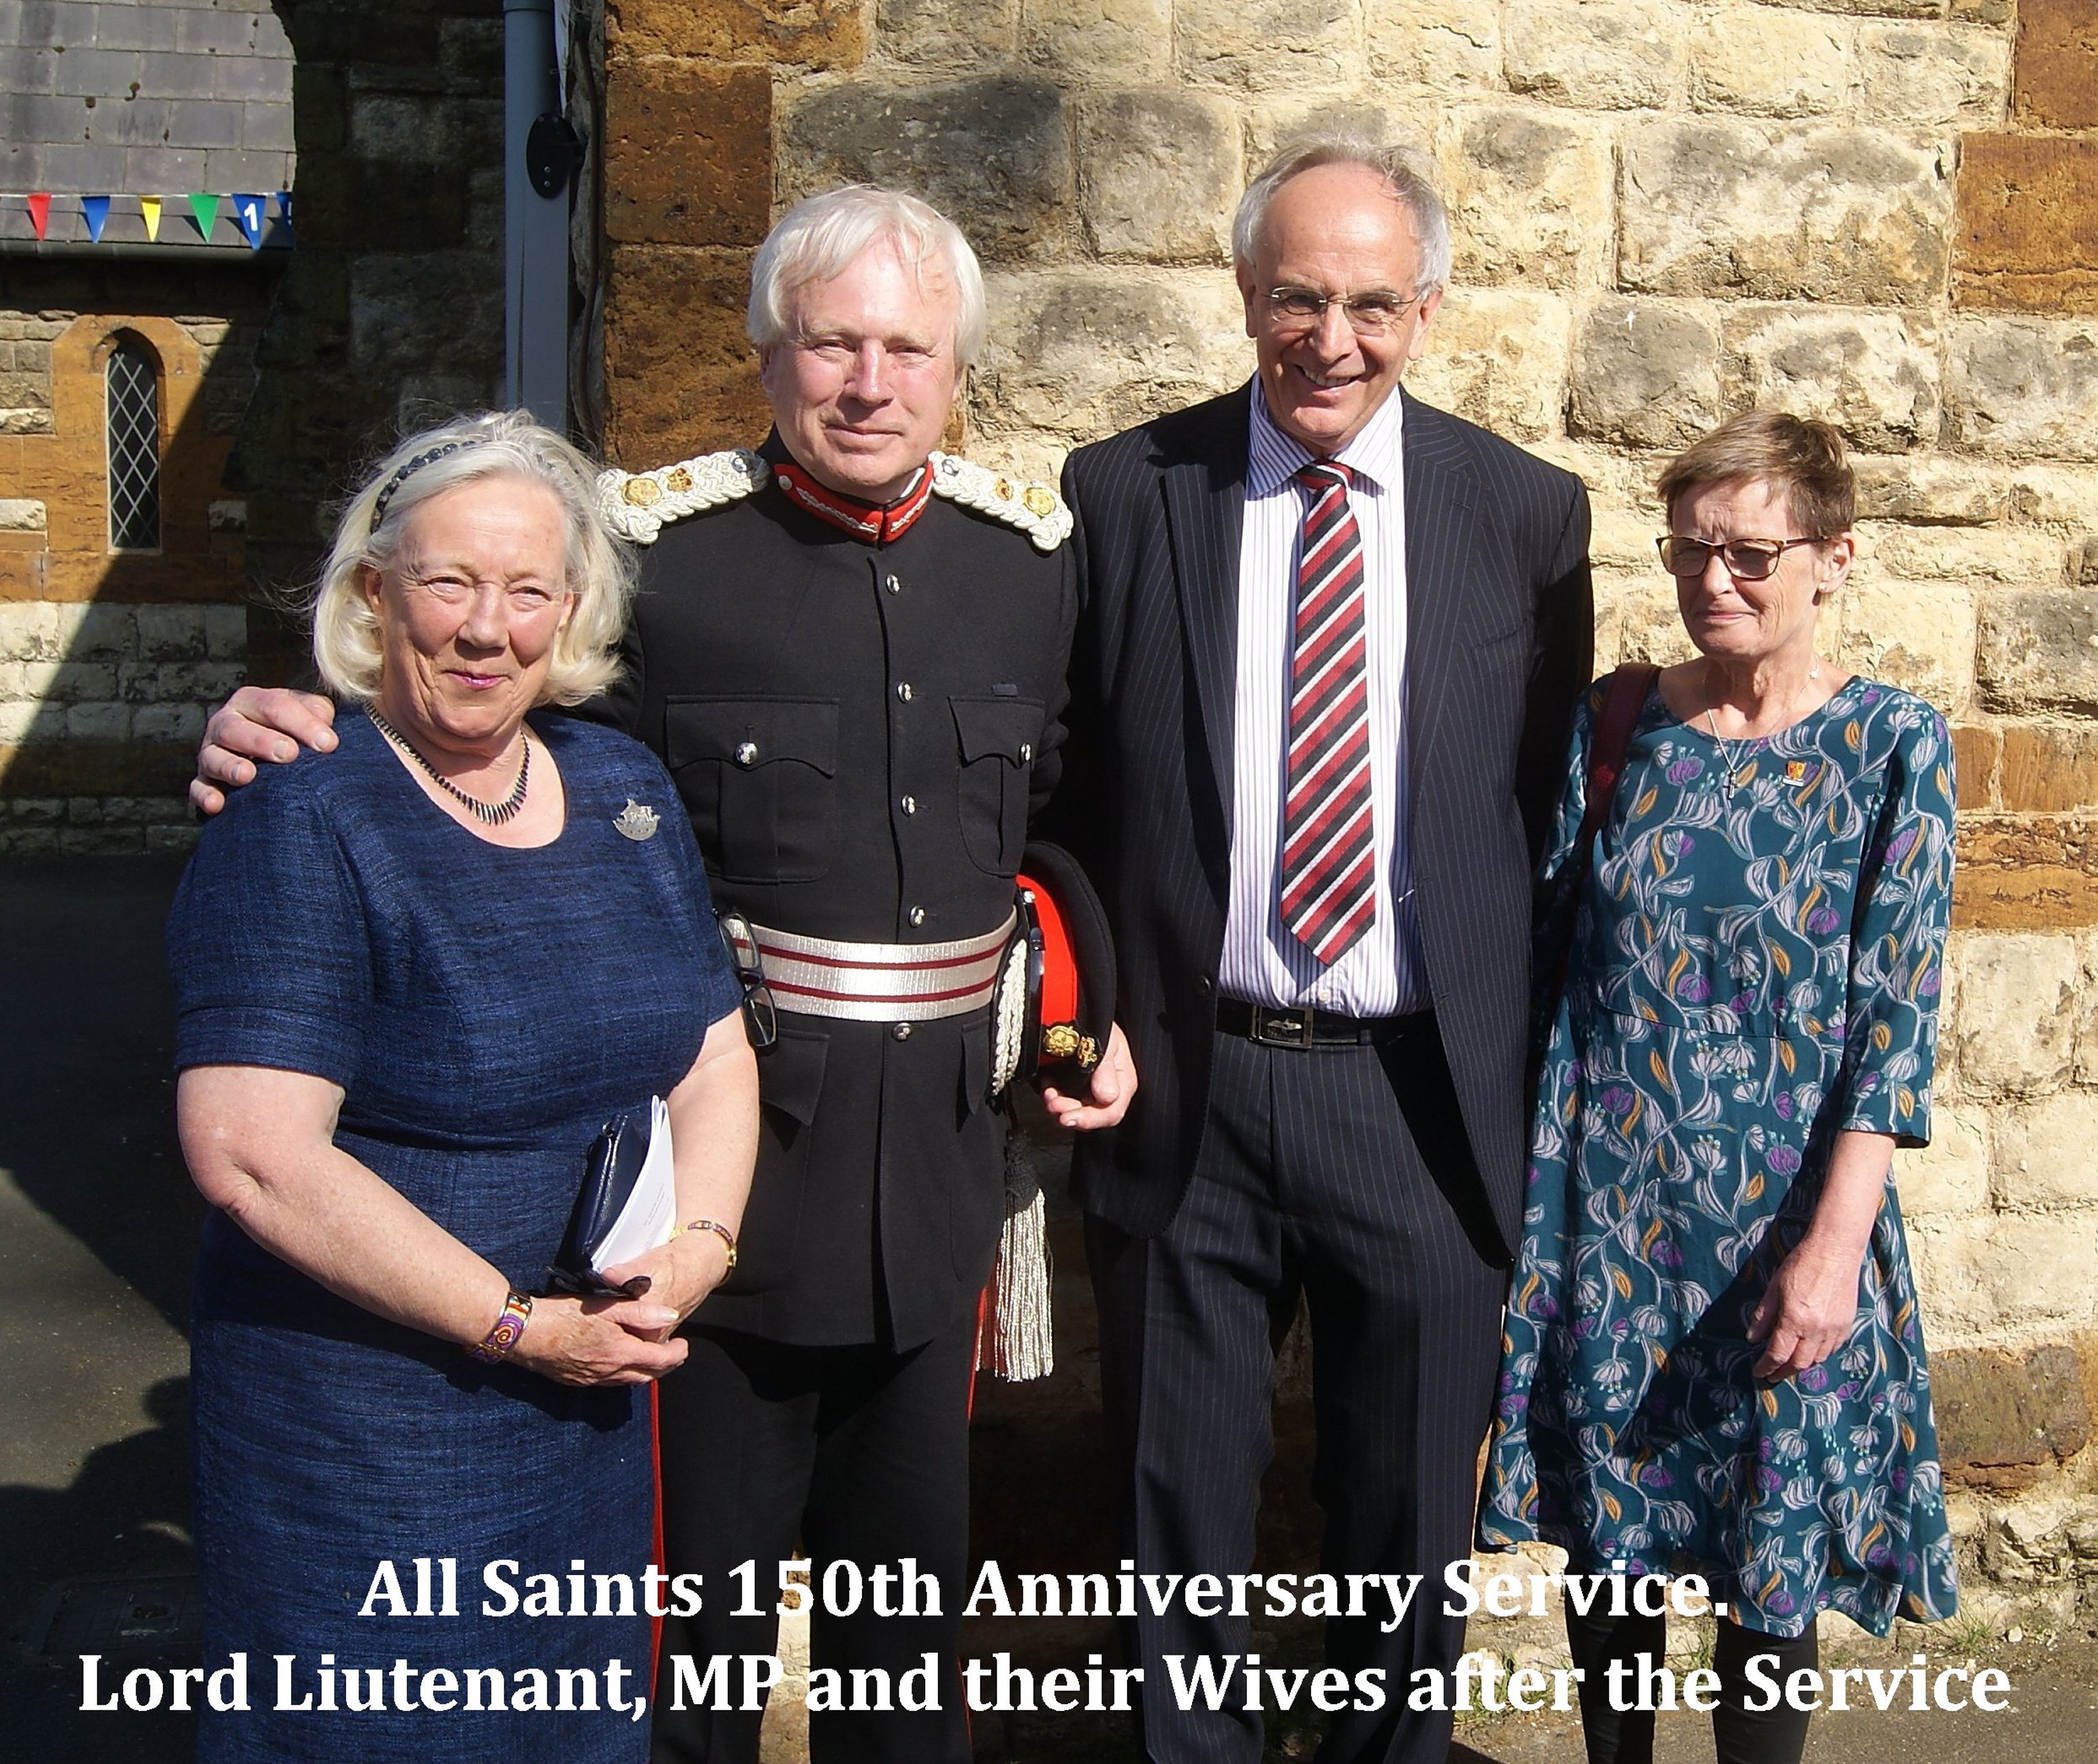 (012) Lord Lieutenant, MP and wives